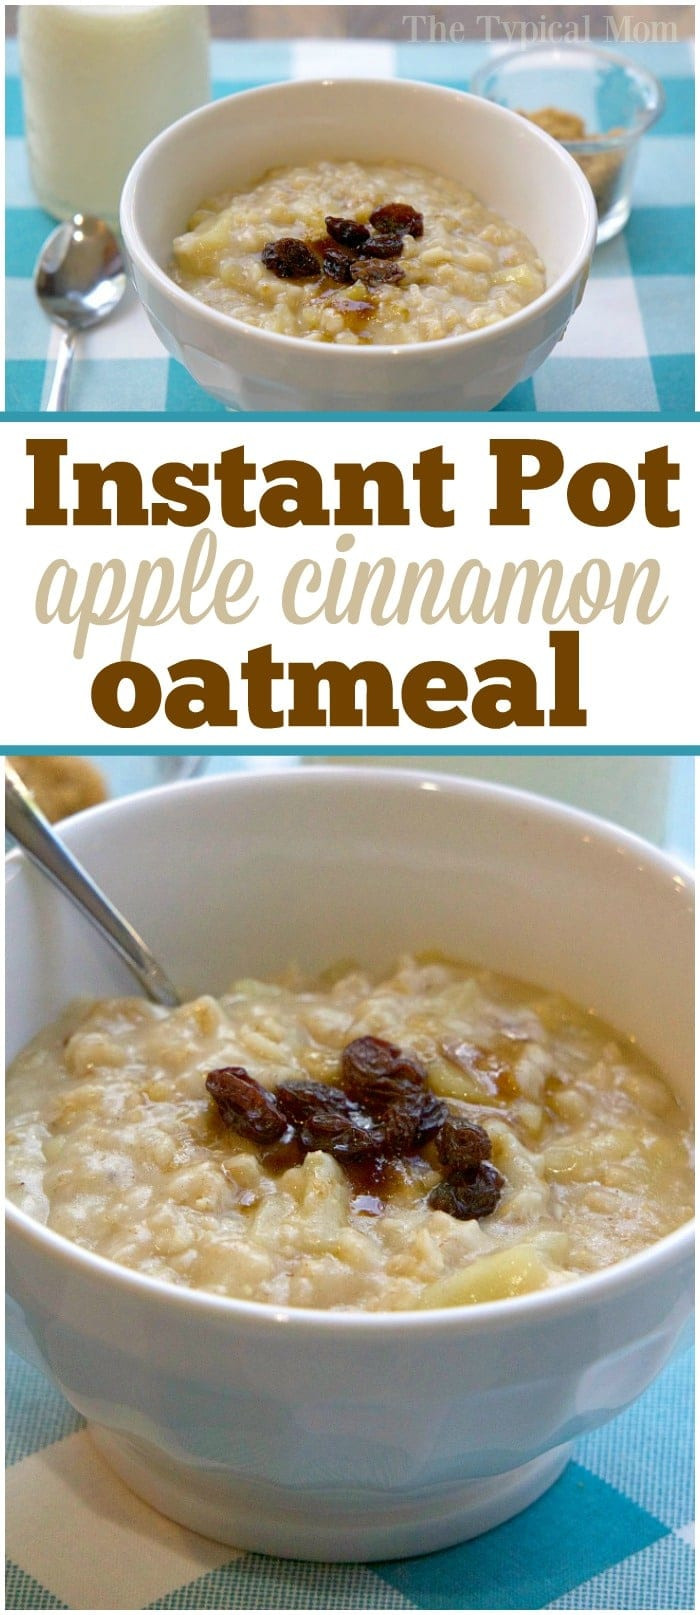 Instant Pot Oatmeal Recipes
 Instant Pot Oatmeal · The Typical Mom